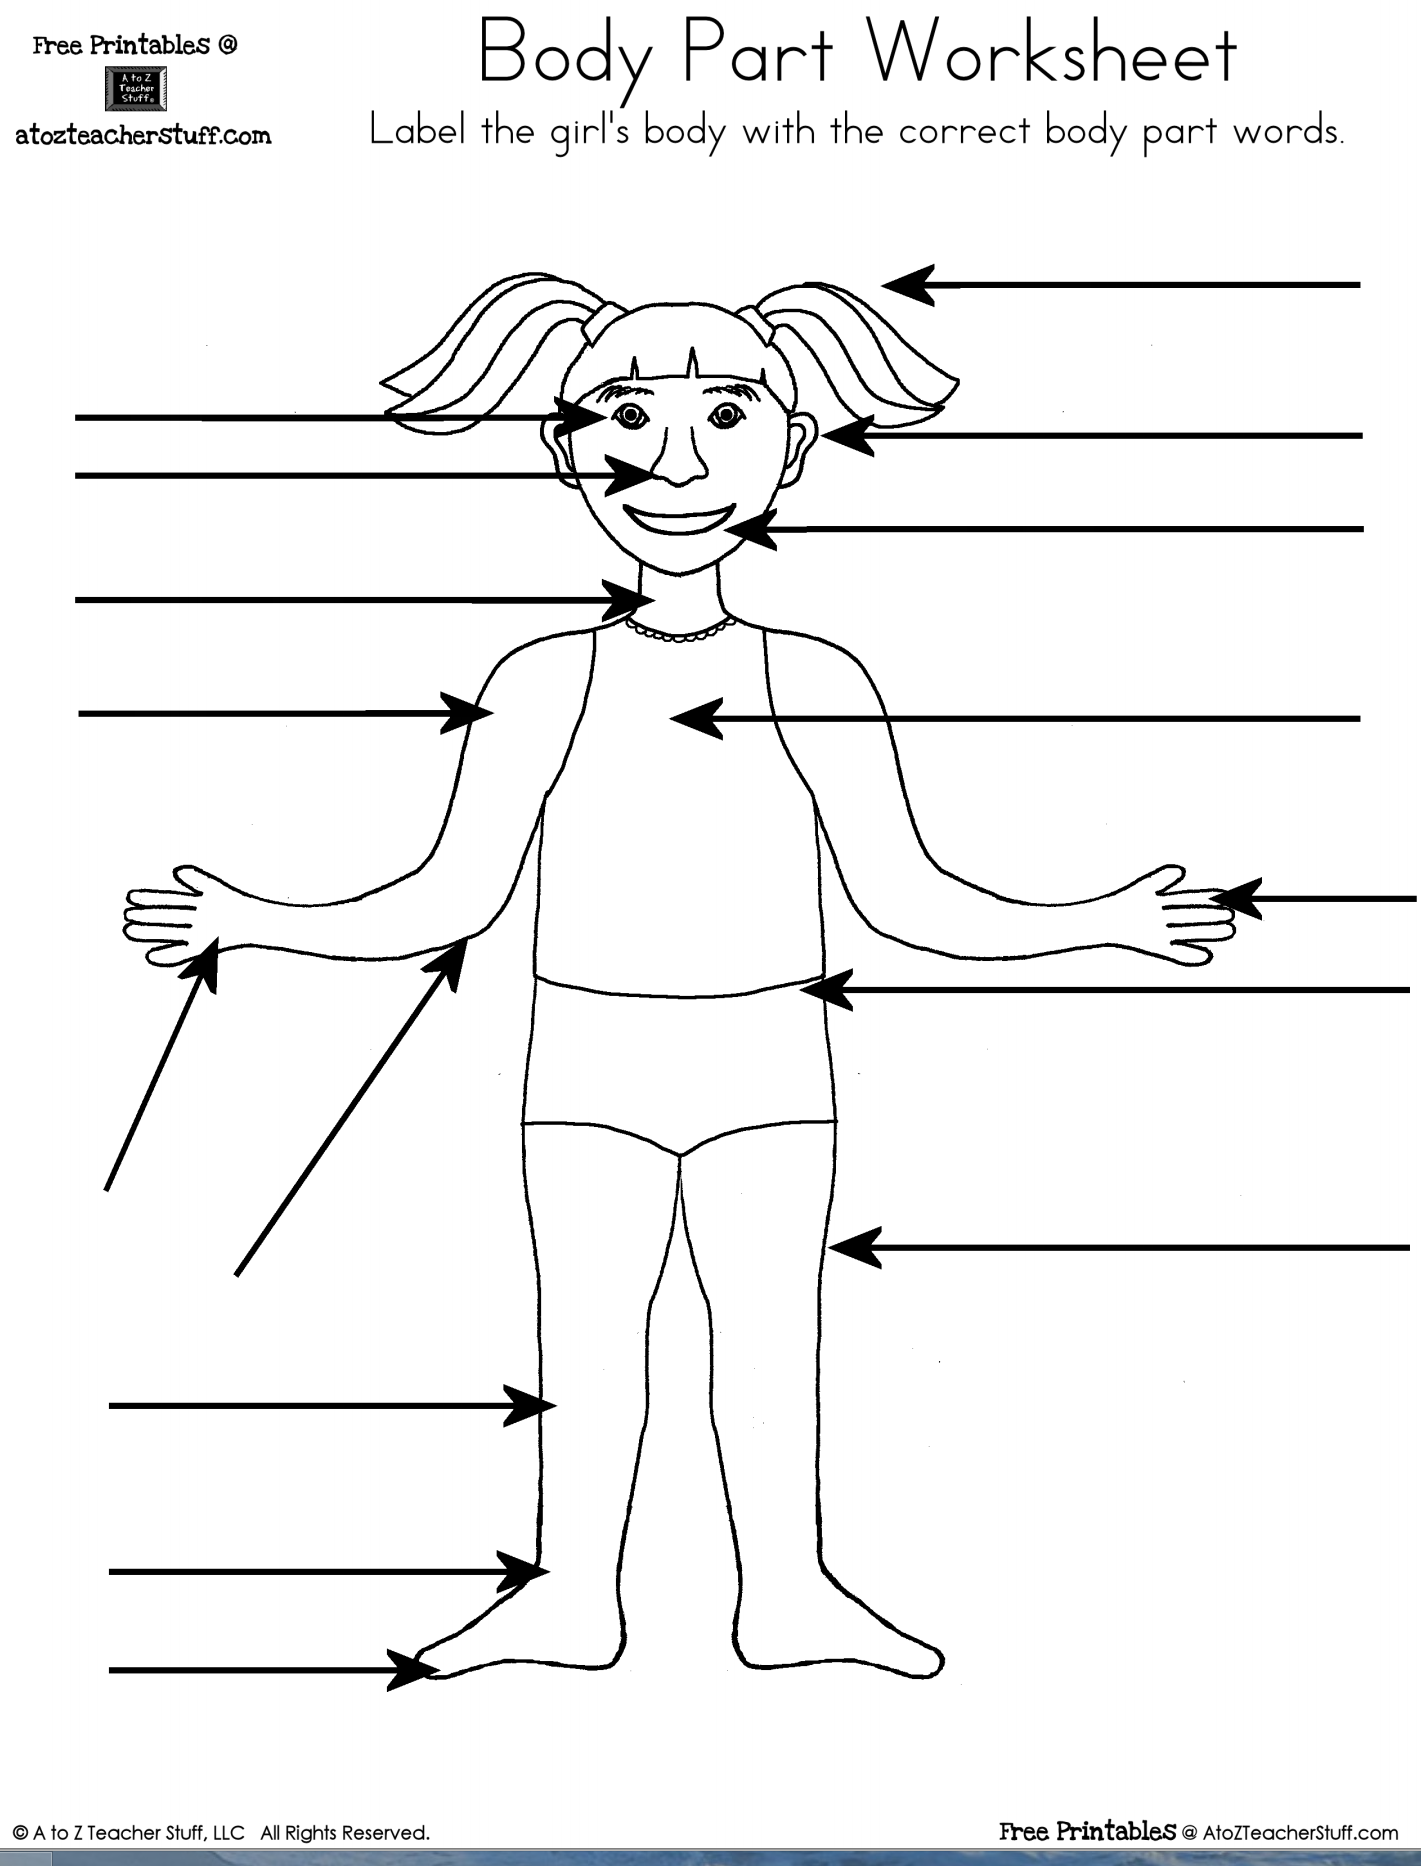 Free Worksheets Parts Of The Body On Example With Free Worksheets